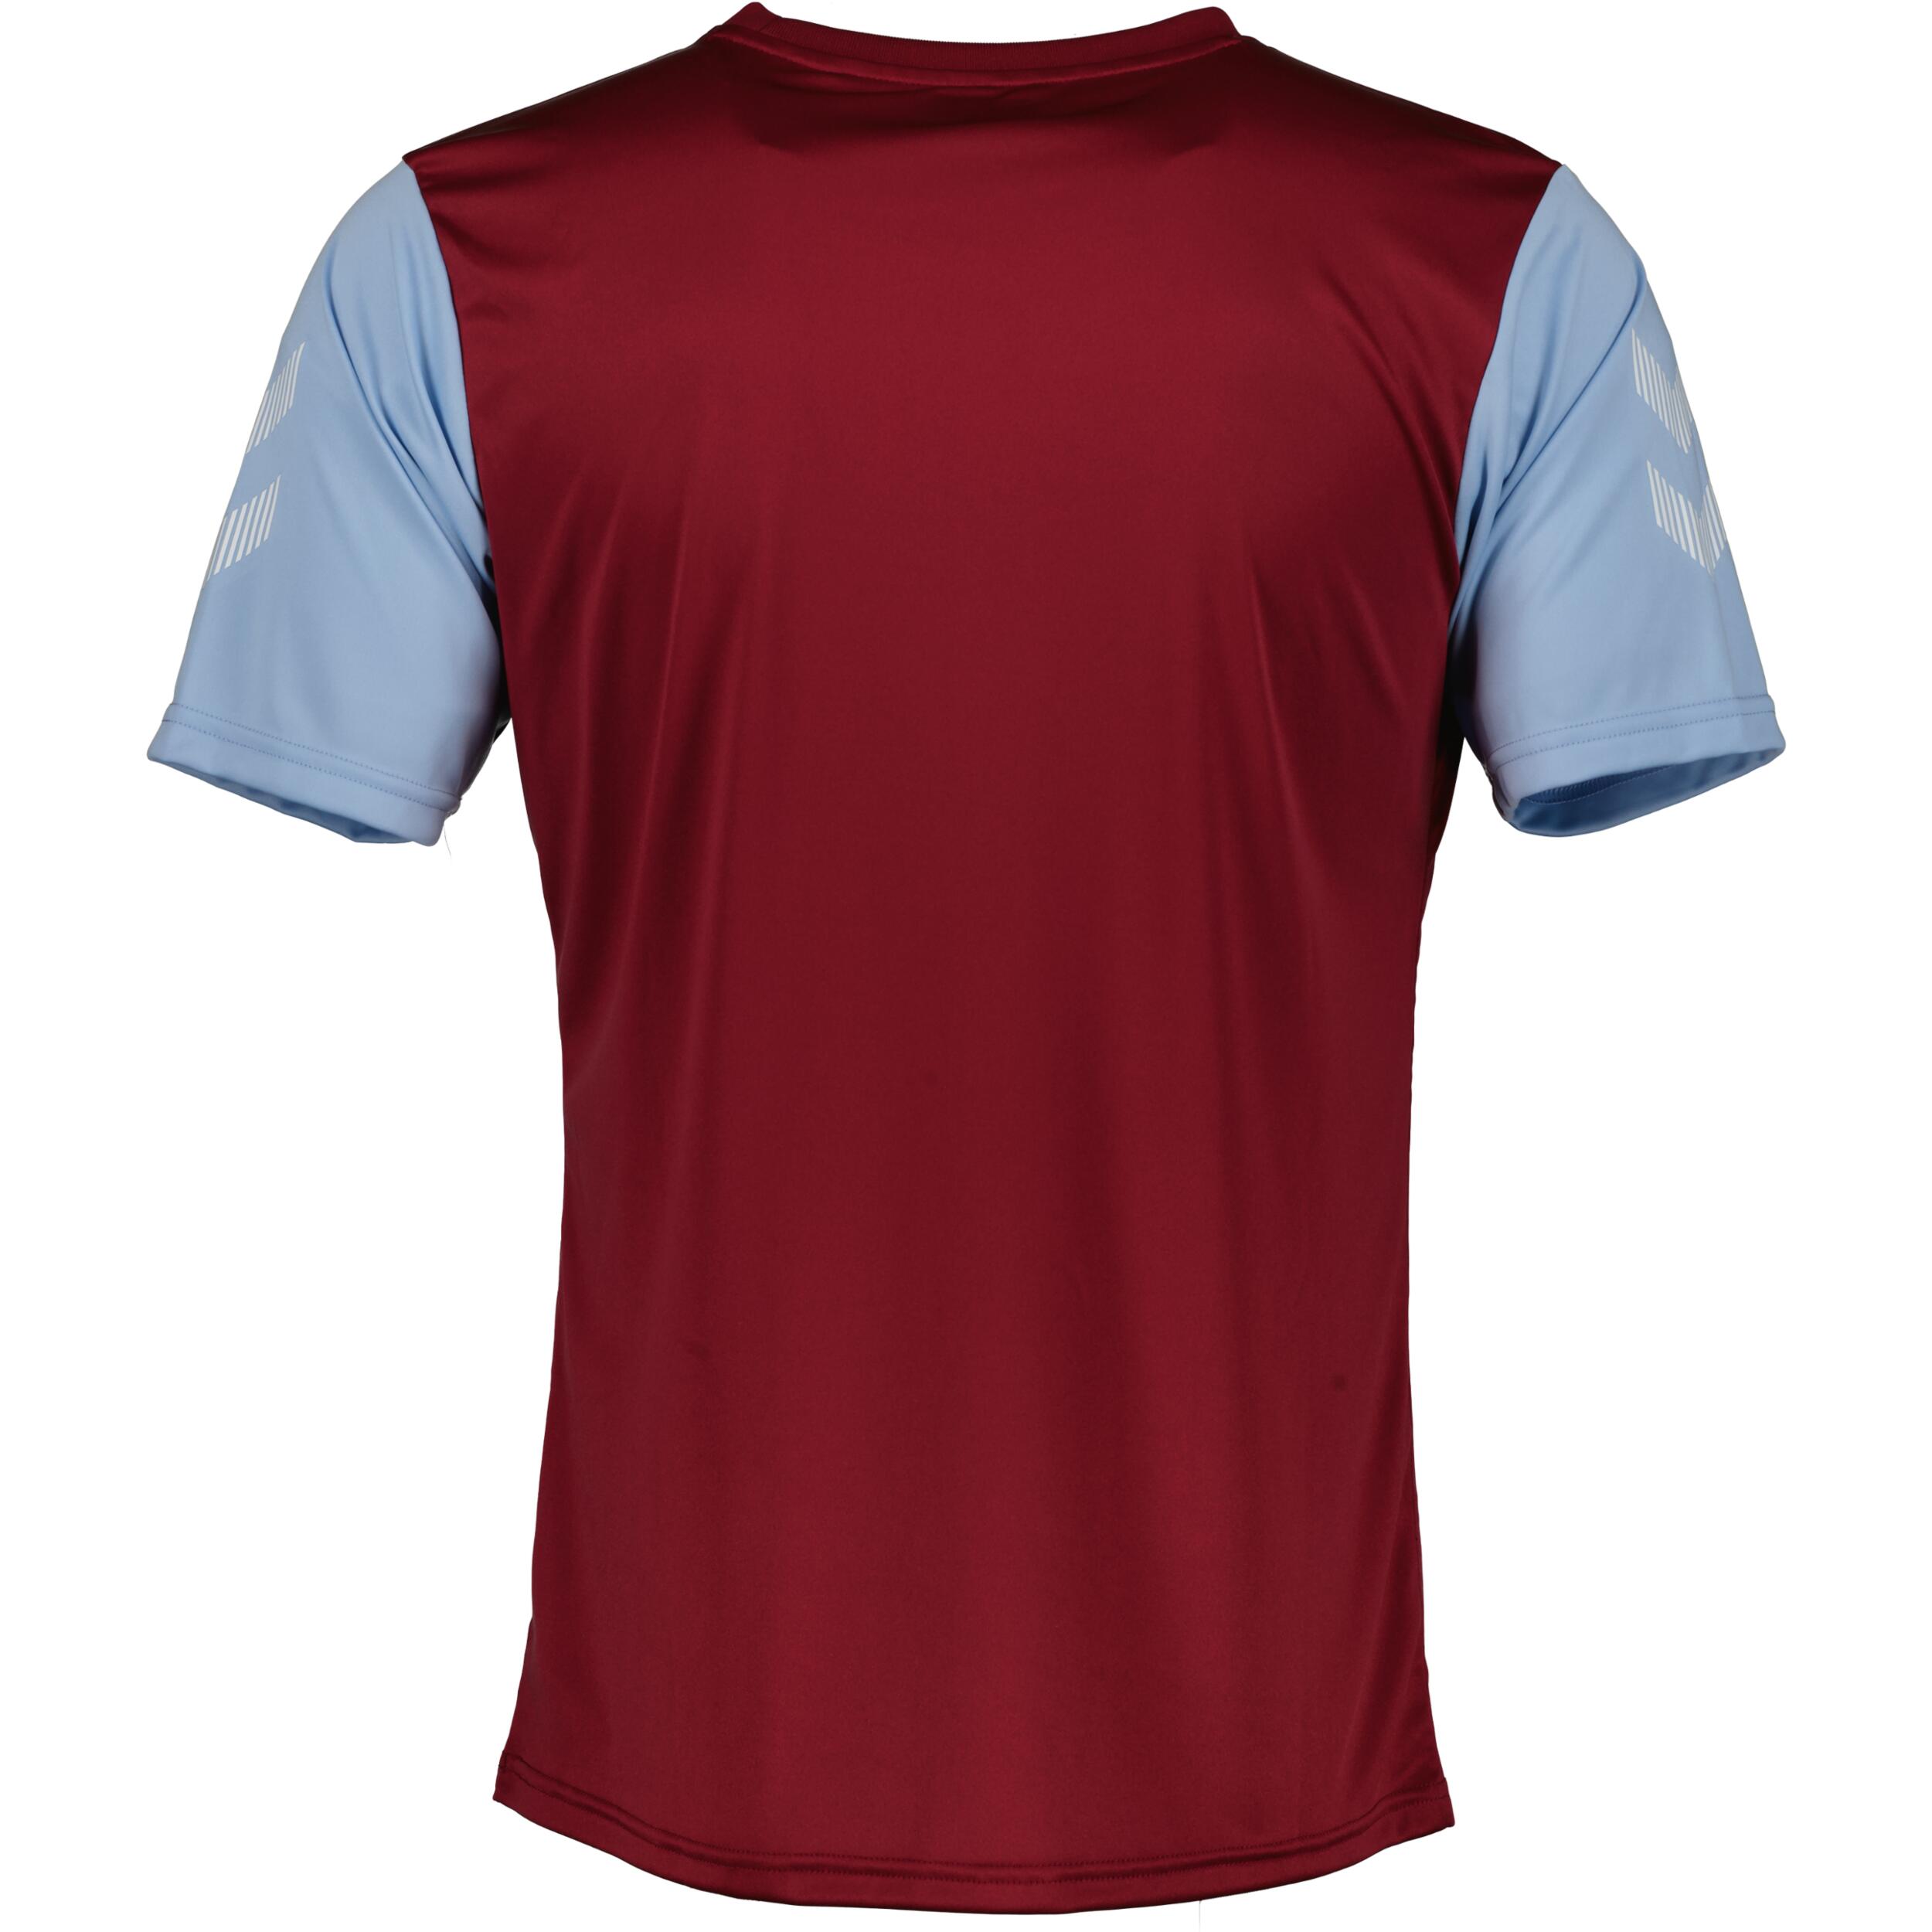 Match jersey for men, great for football, in maroon/argentina blue 2/3